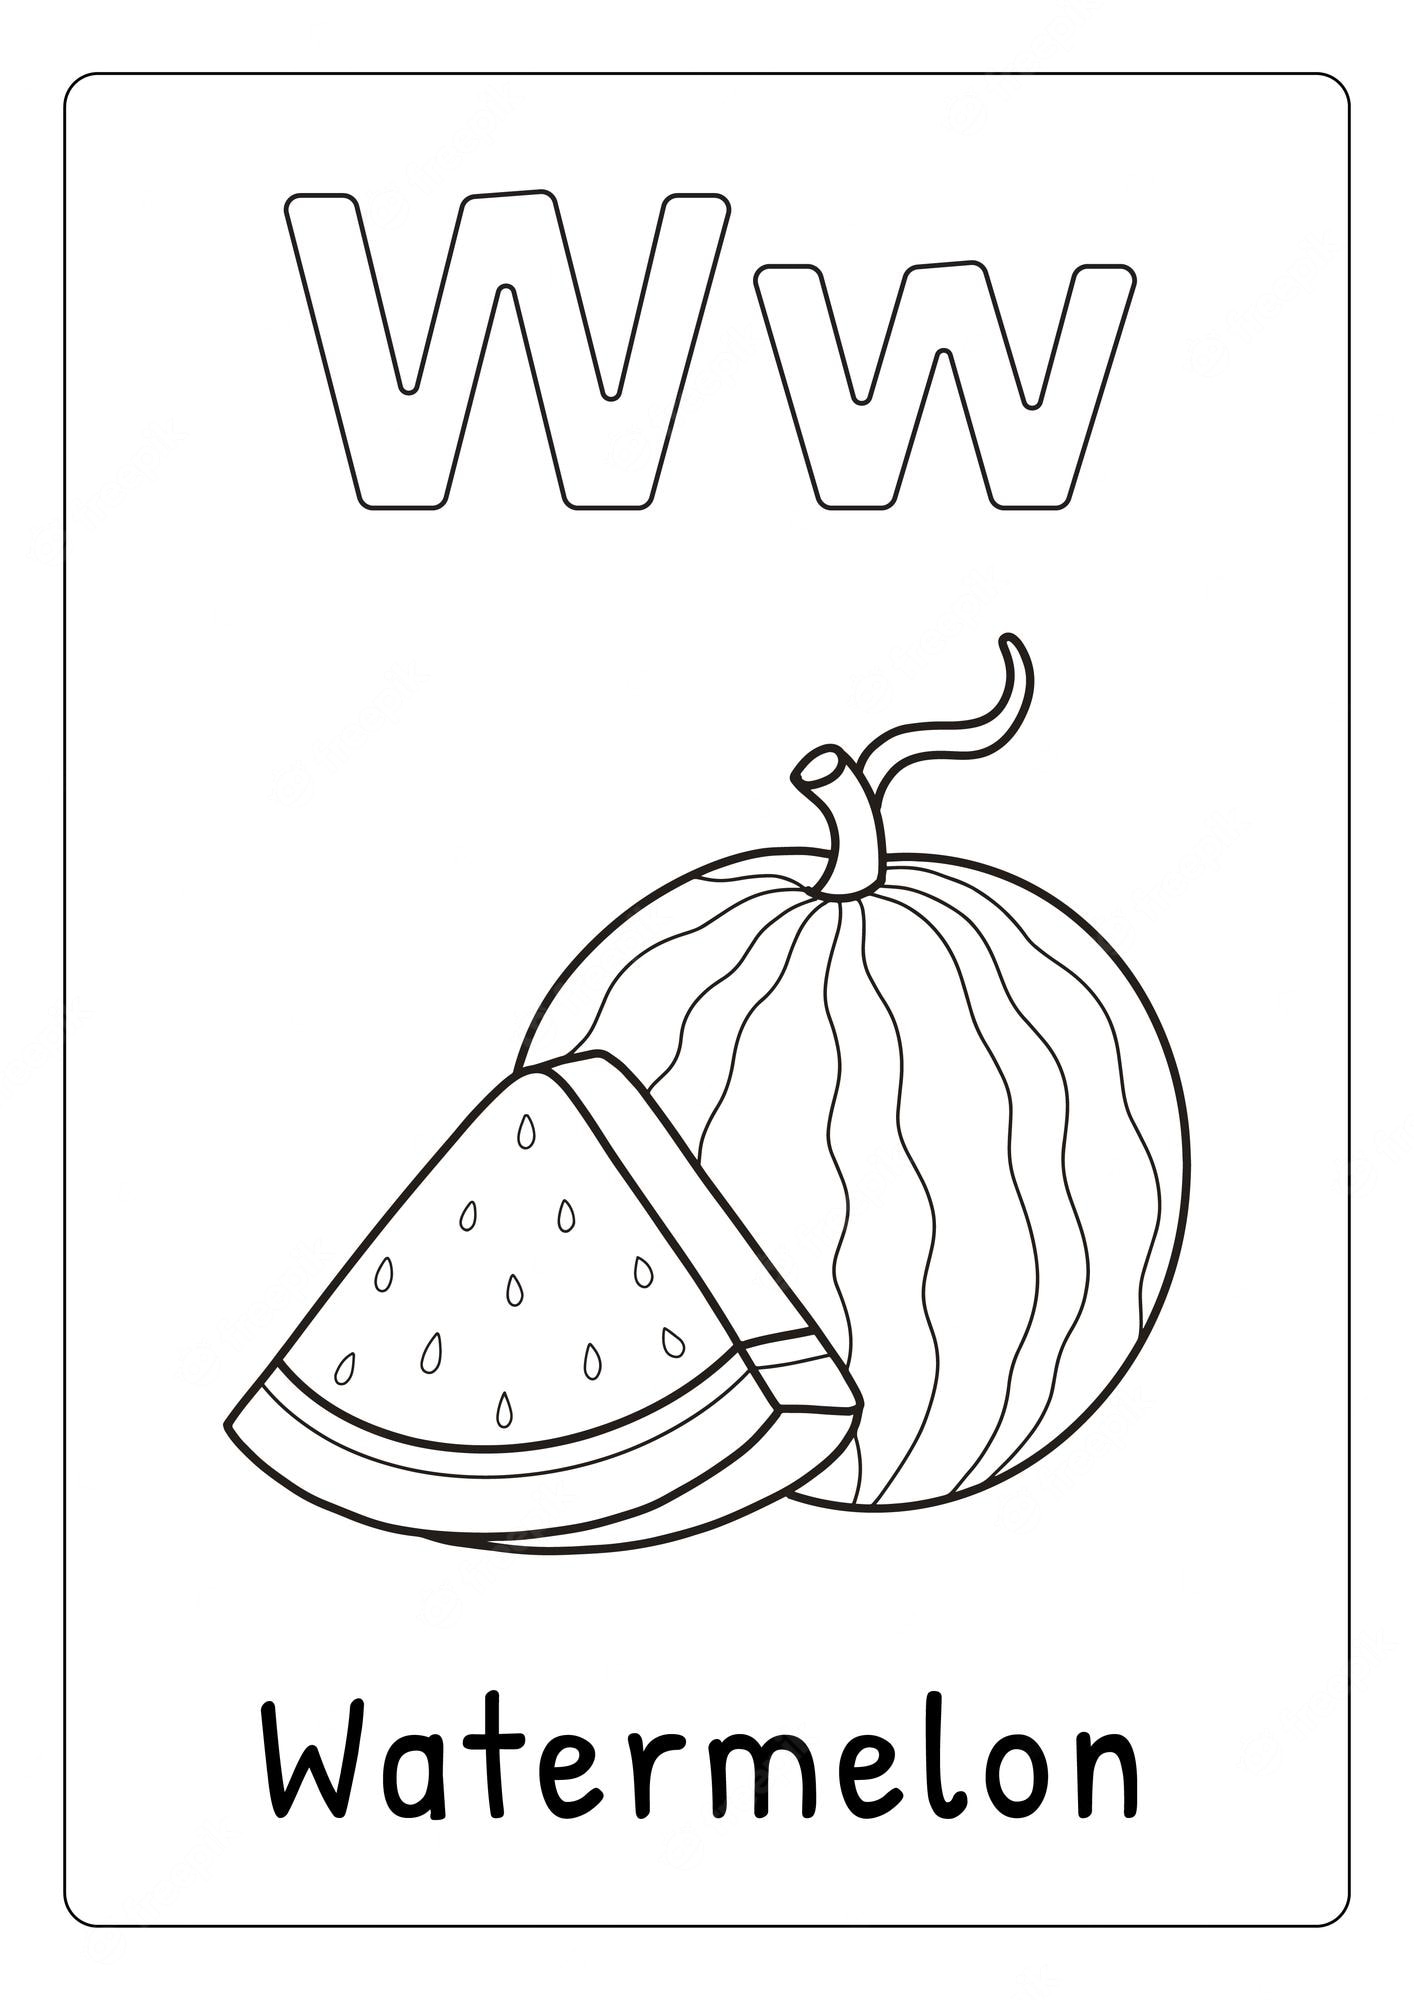 Premium Vector | Alphabet letter w for watermelon coloring page for kids